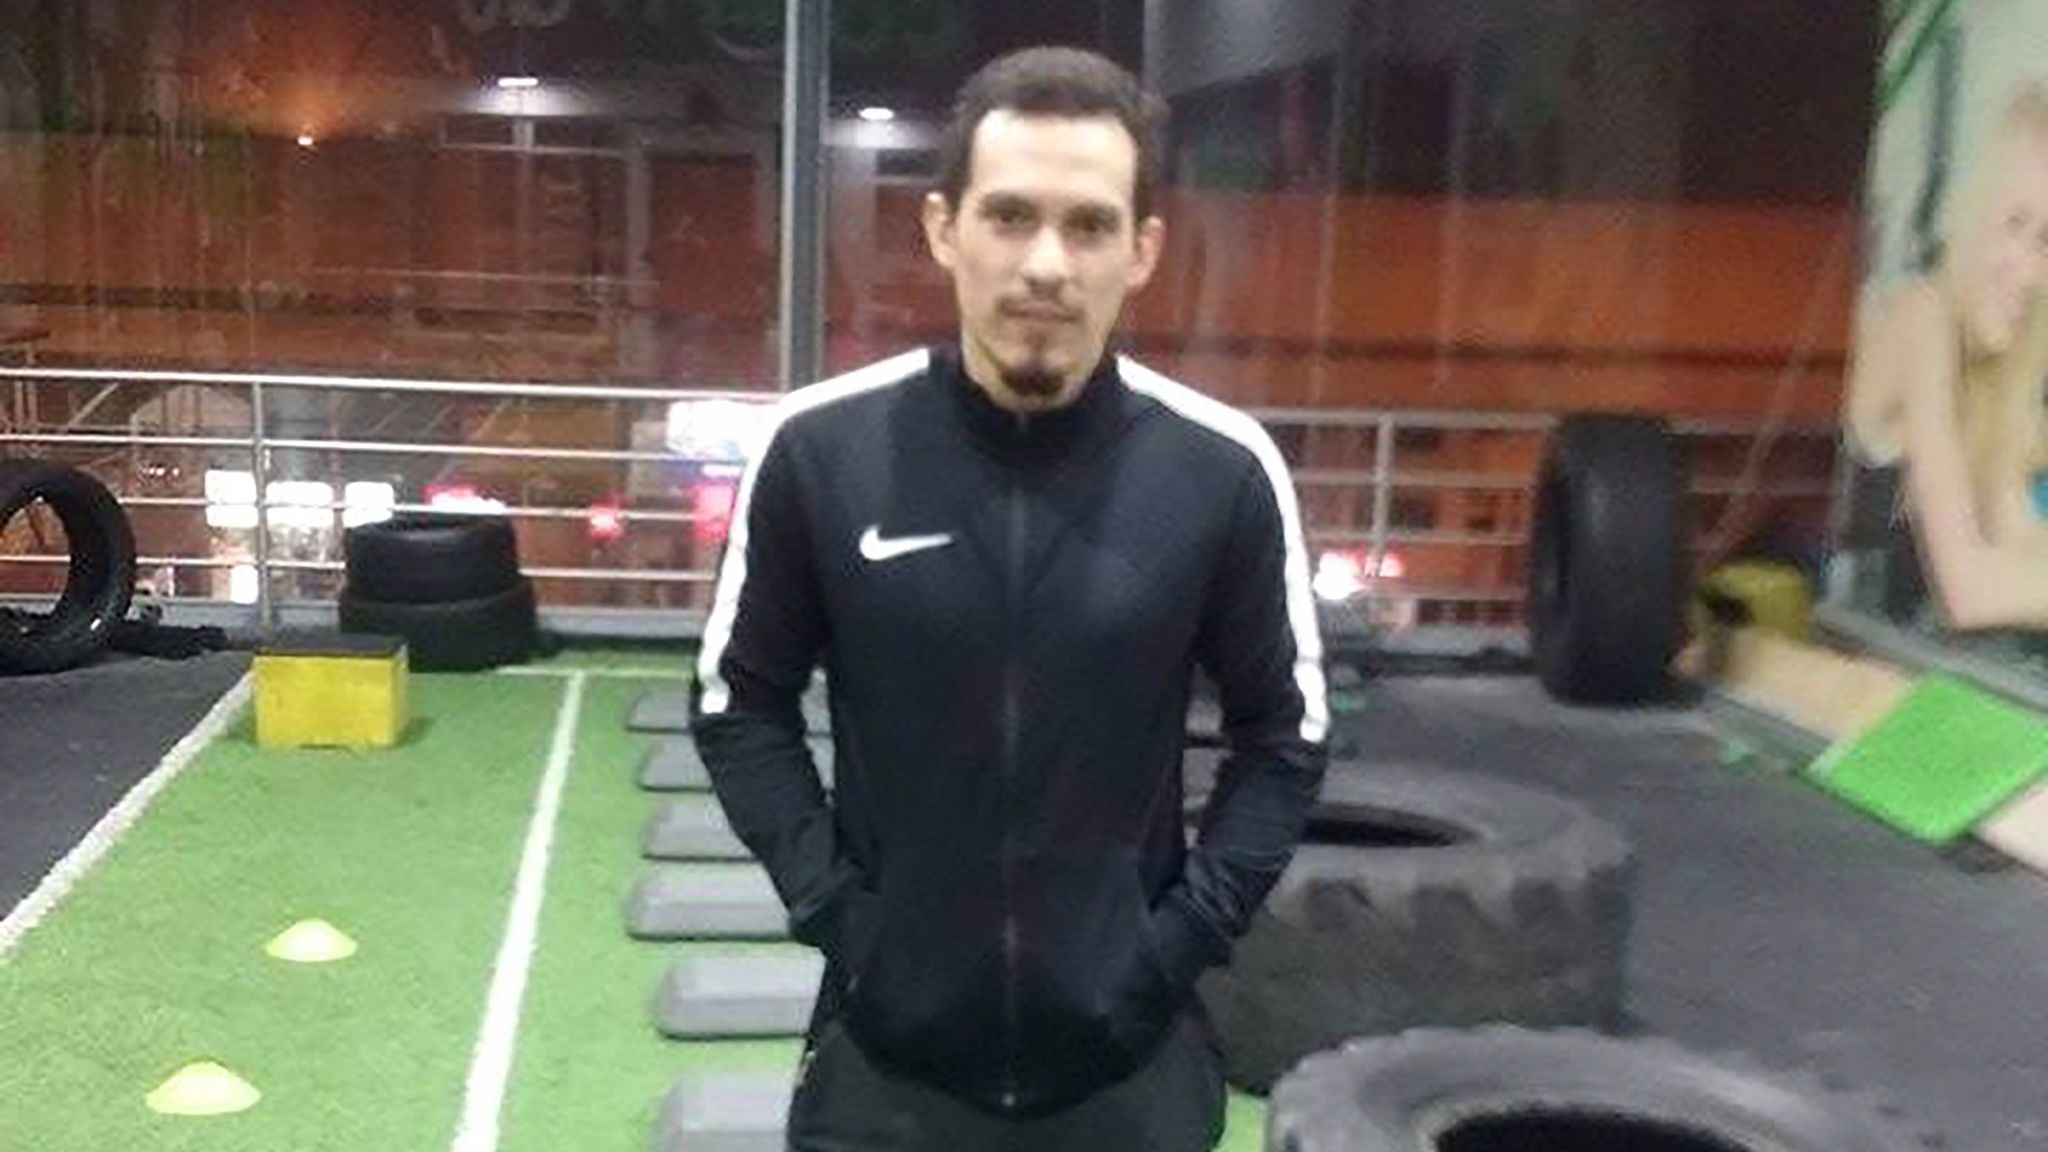 Ignacio Jose Cardosa is a trained electrical engineer but works as a personal trainer in Lima, Peru.